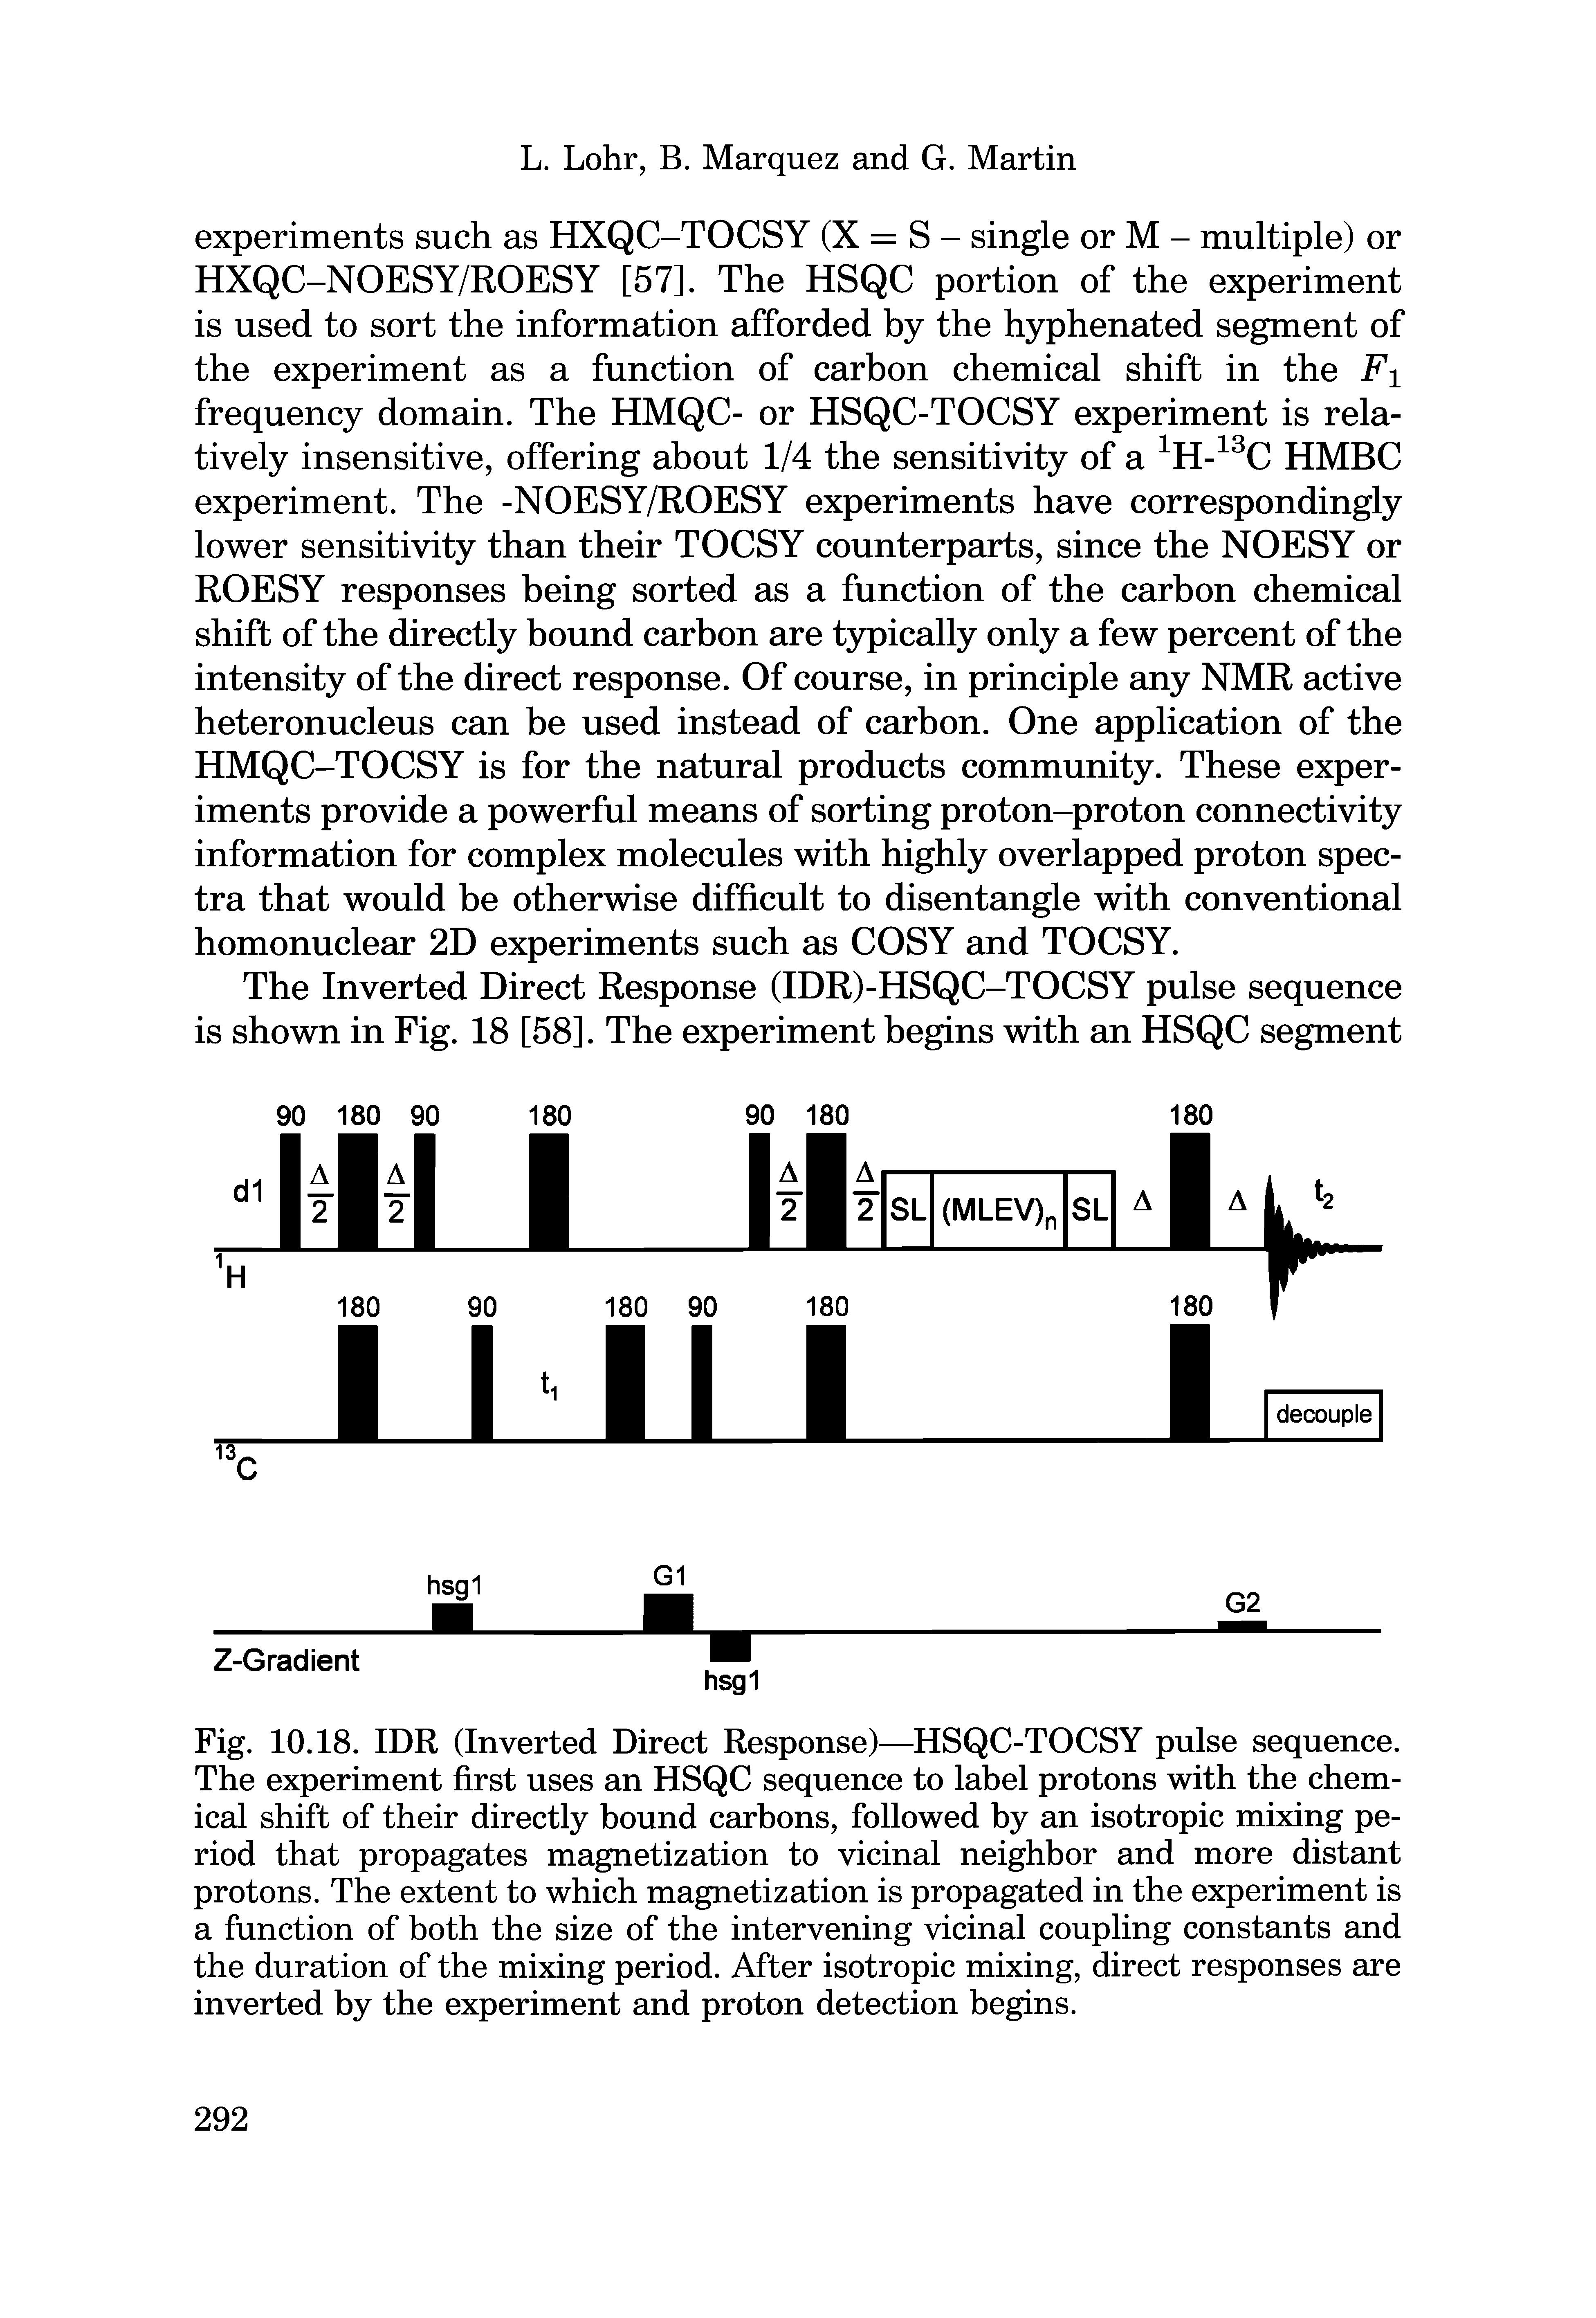 Fig. 10.18. IDR (Inverted Direct Response)—HSQC-TOCSY pulse sequence. The experiment first uses an HSQC sequence to label protons with the chemical shift of their directly bound carbons, followed by an isotropic mixing period that propagates magnetization to vicinal neighbor and more distant protons. The extent to which magnetization is propagated in the experiment is a function of both the size of the intervening vicinal coupling constants and the duration of the mixing period. After isotropic mixing, direct responses are inverted by the experiment and proton detection begins.